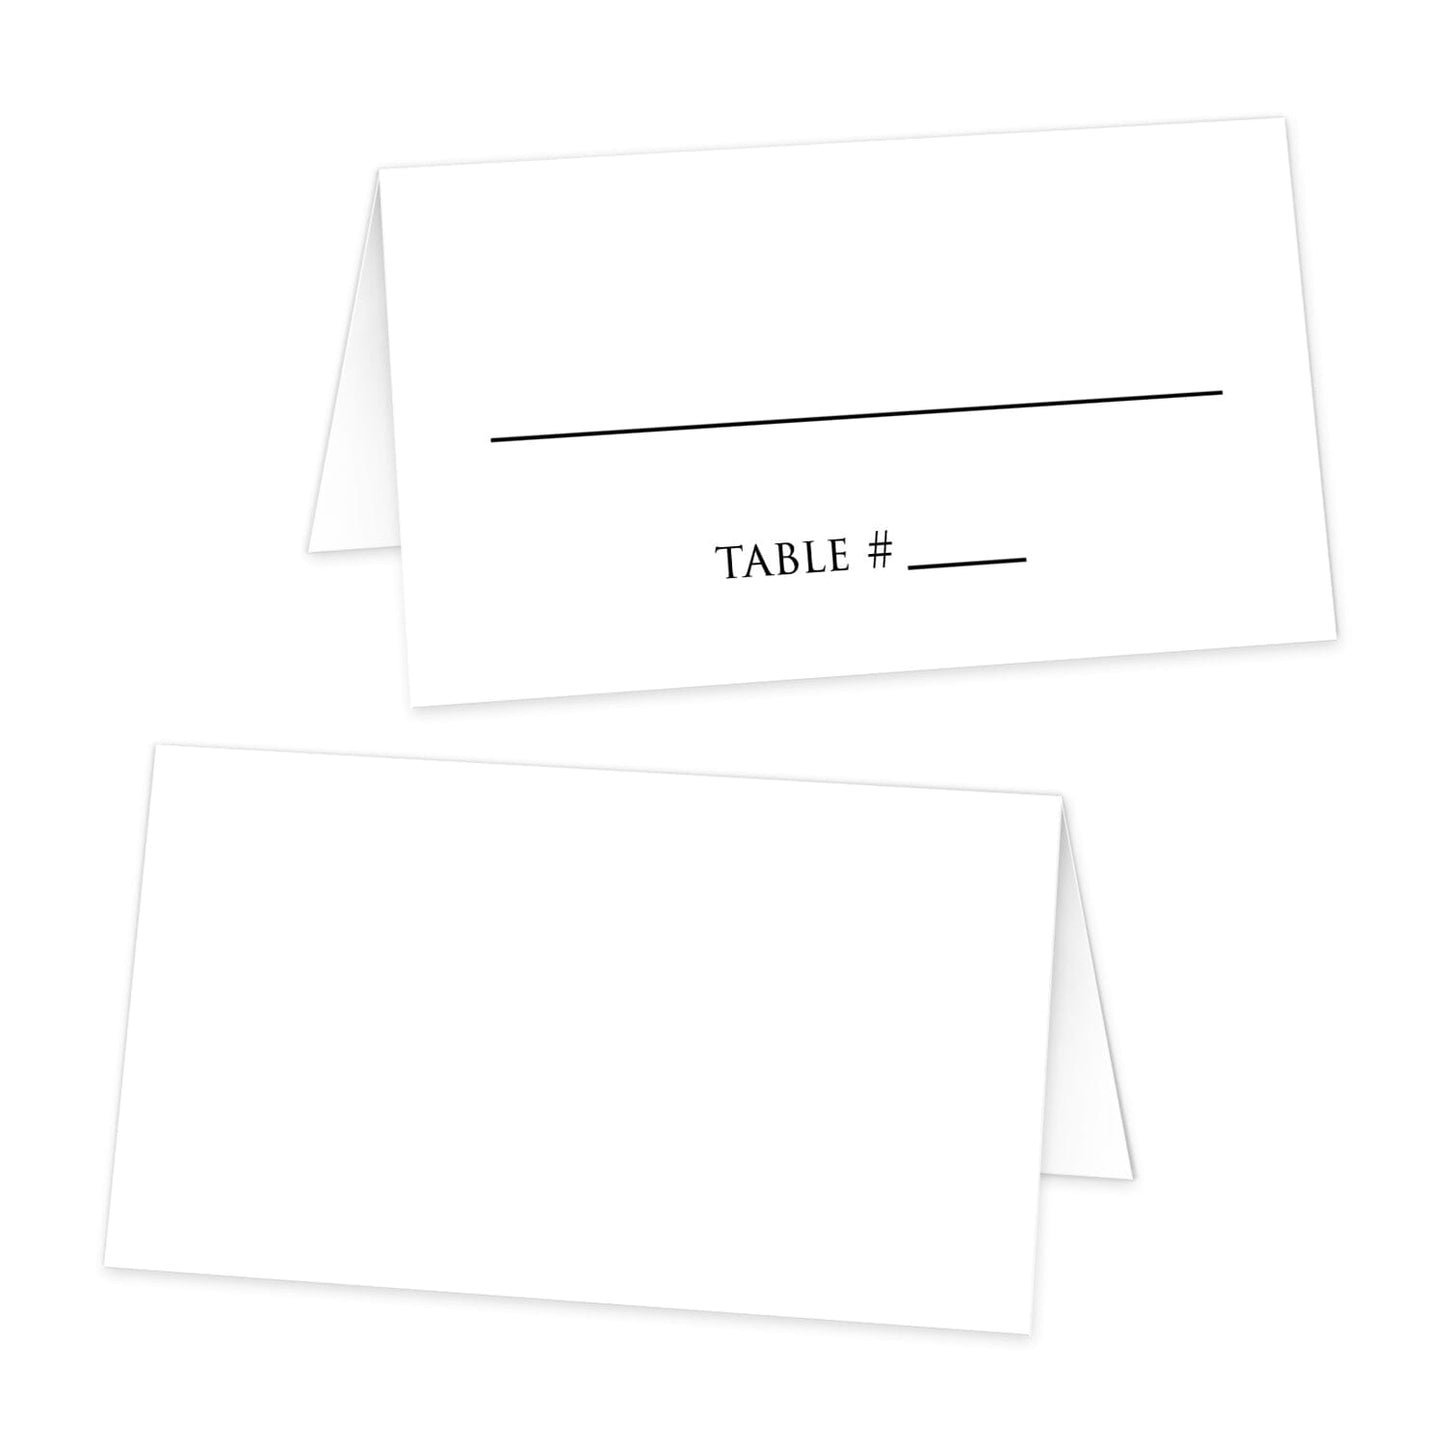 Plain White (no design) Folded Place Cards at Artistically Invited. White place cards with lines for writing your guest's name and table number on one of the folded cards.